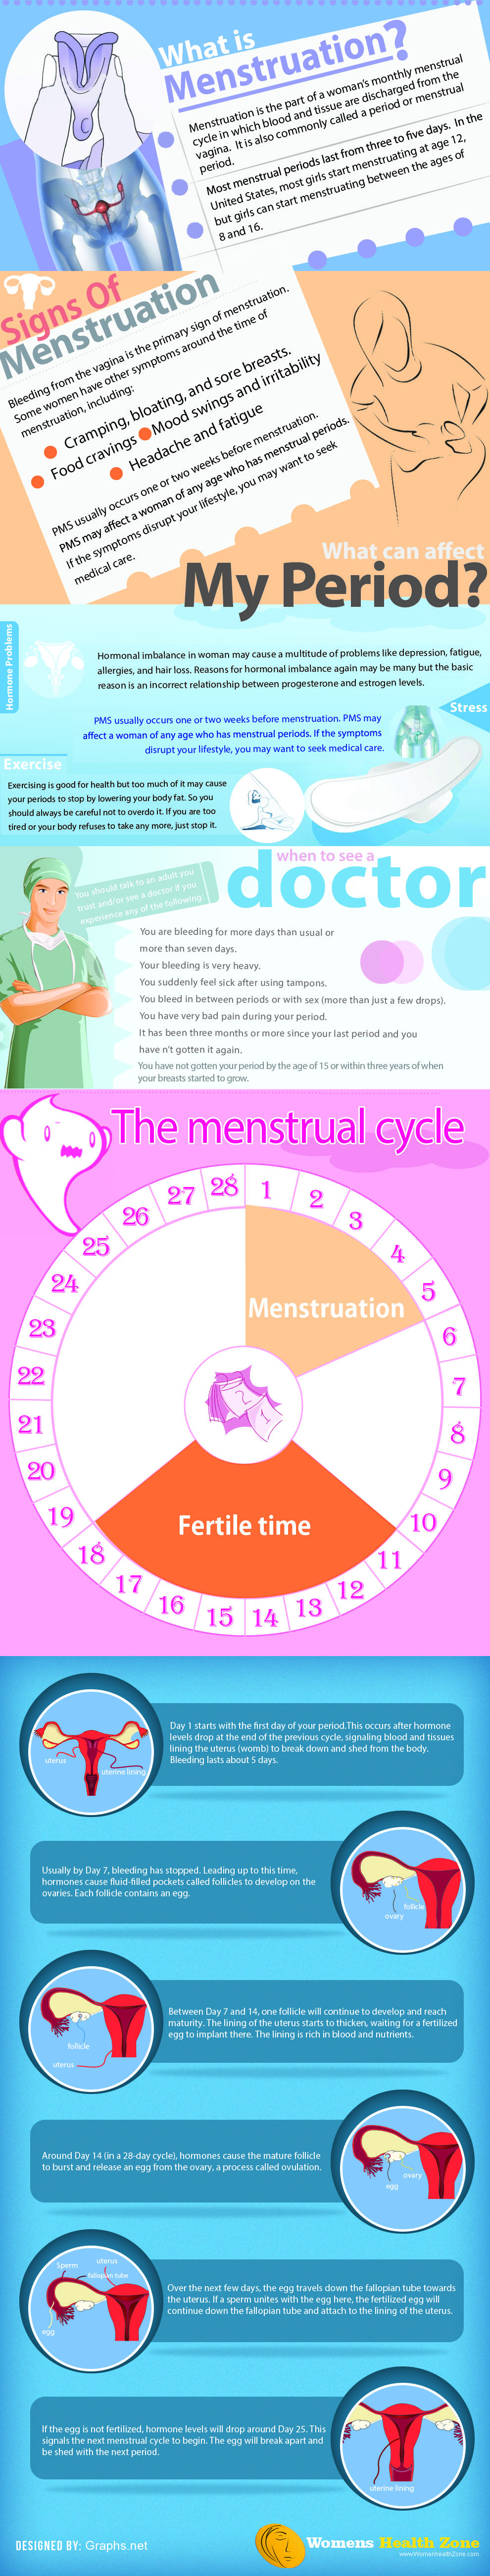 Menstruation and the Menstrual Cycle